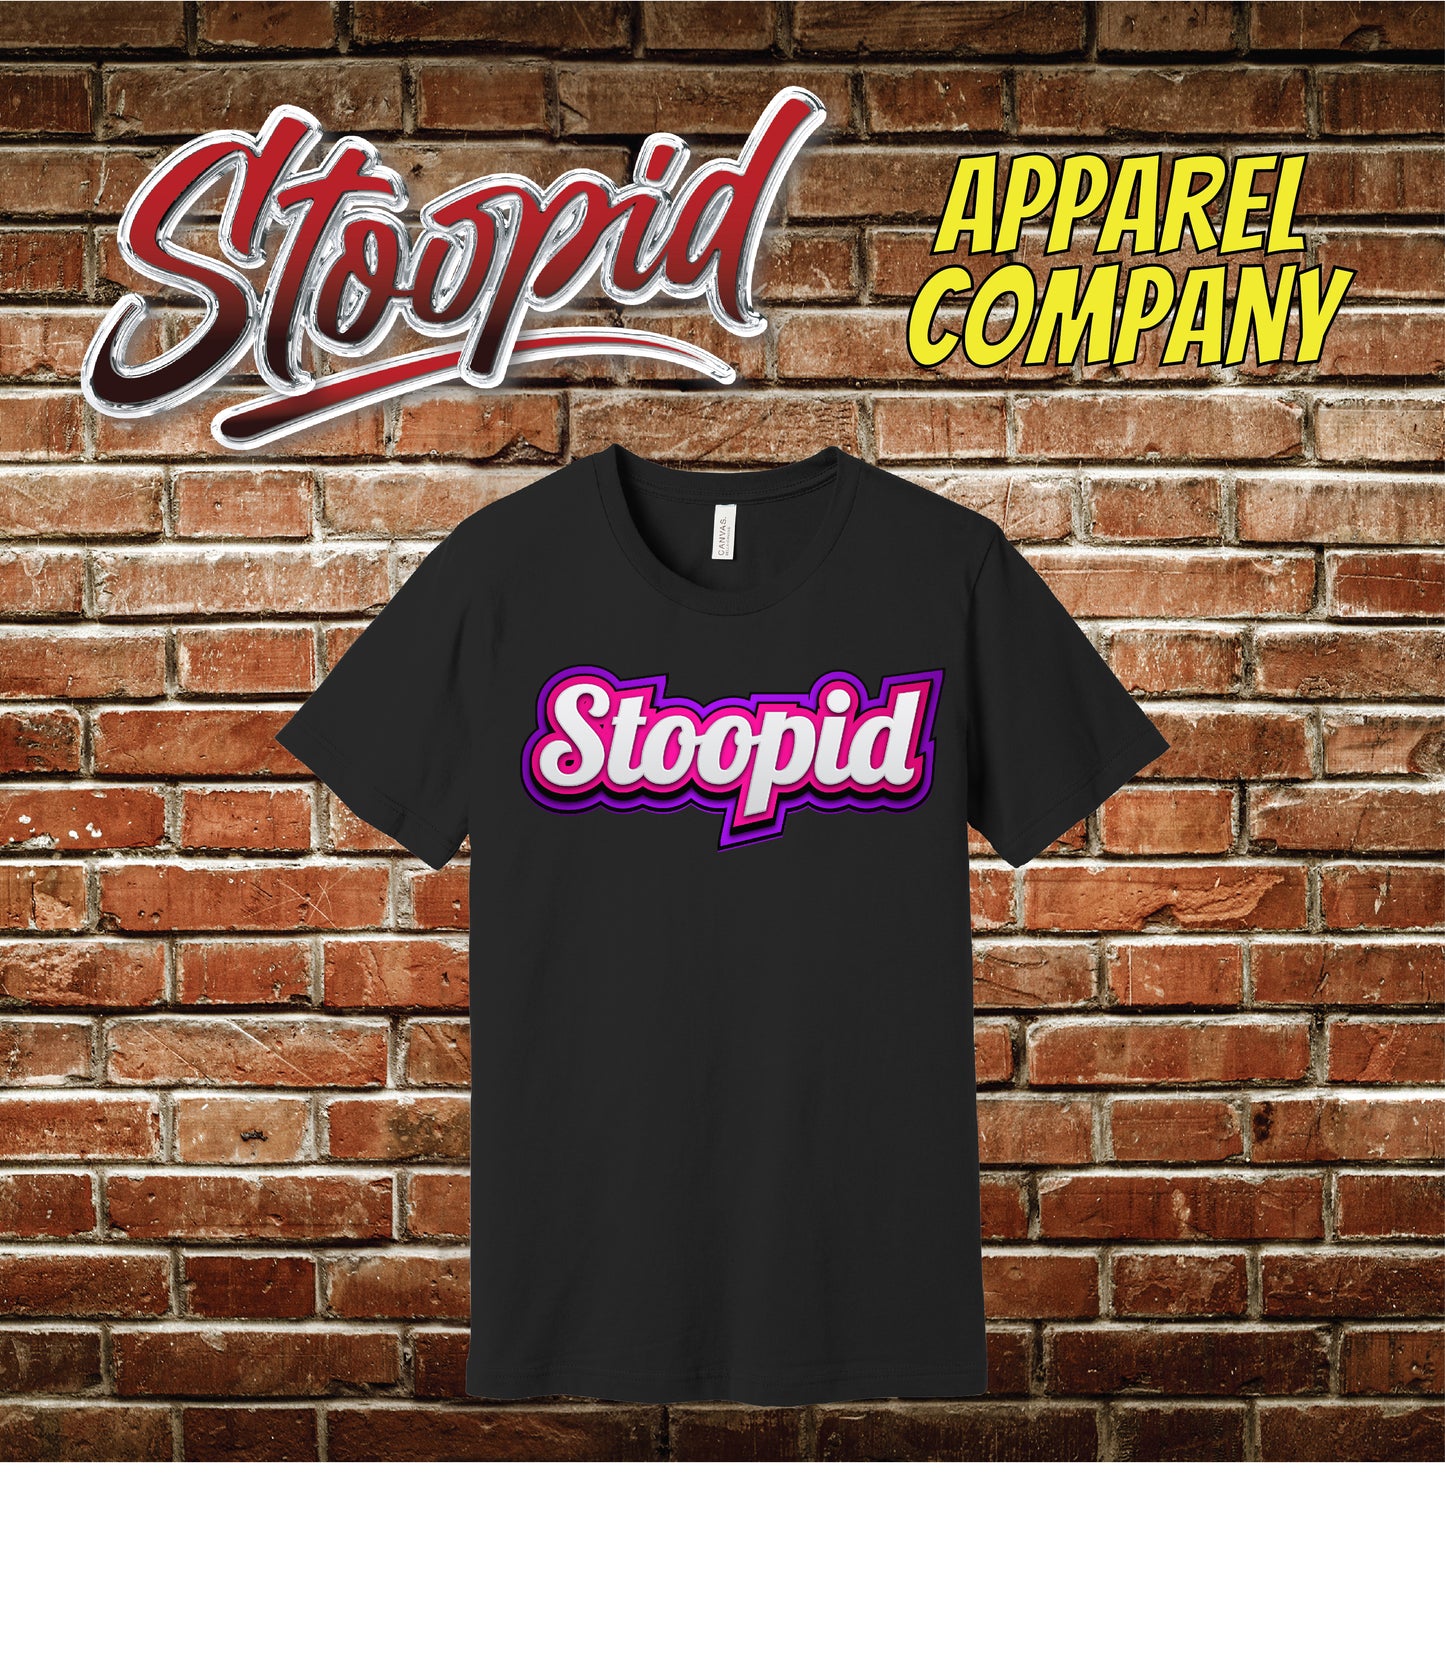 "The Bad Barby" Stoopid T-Shirt